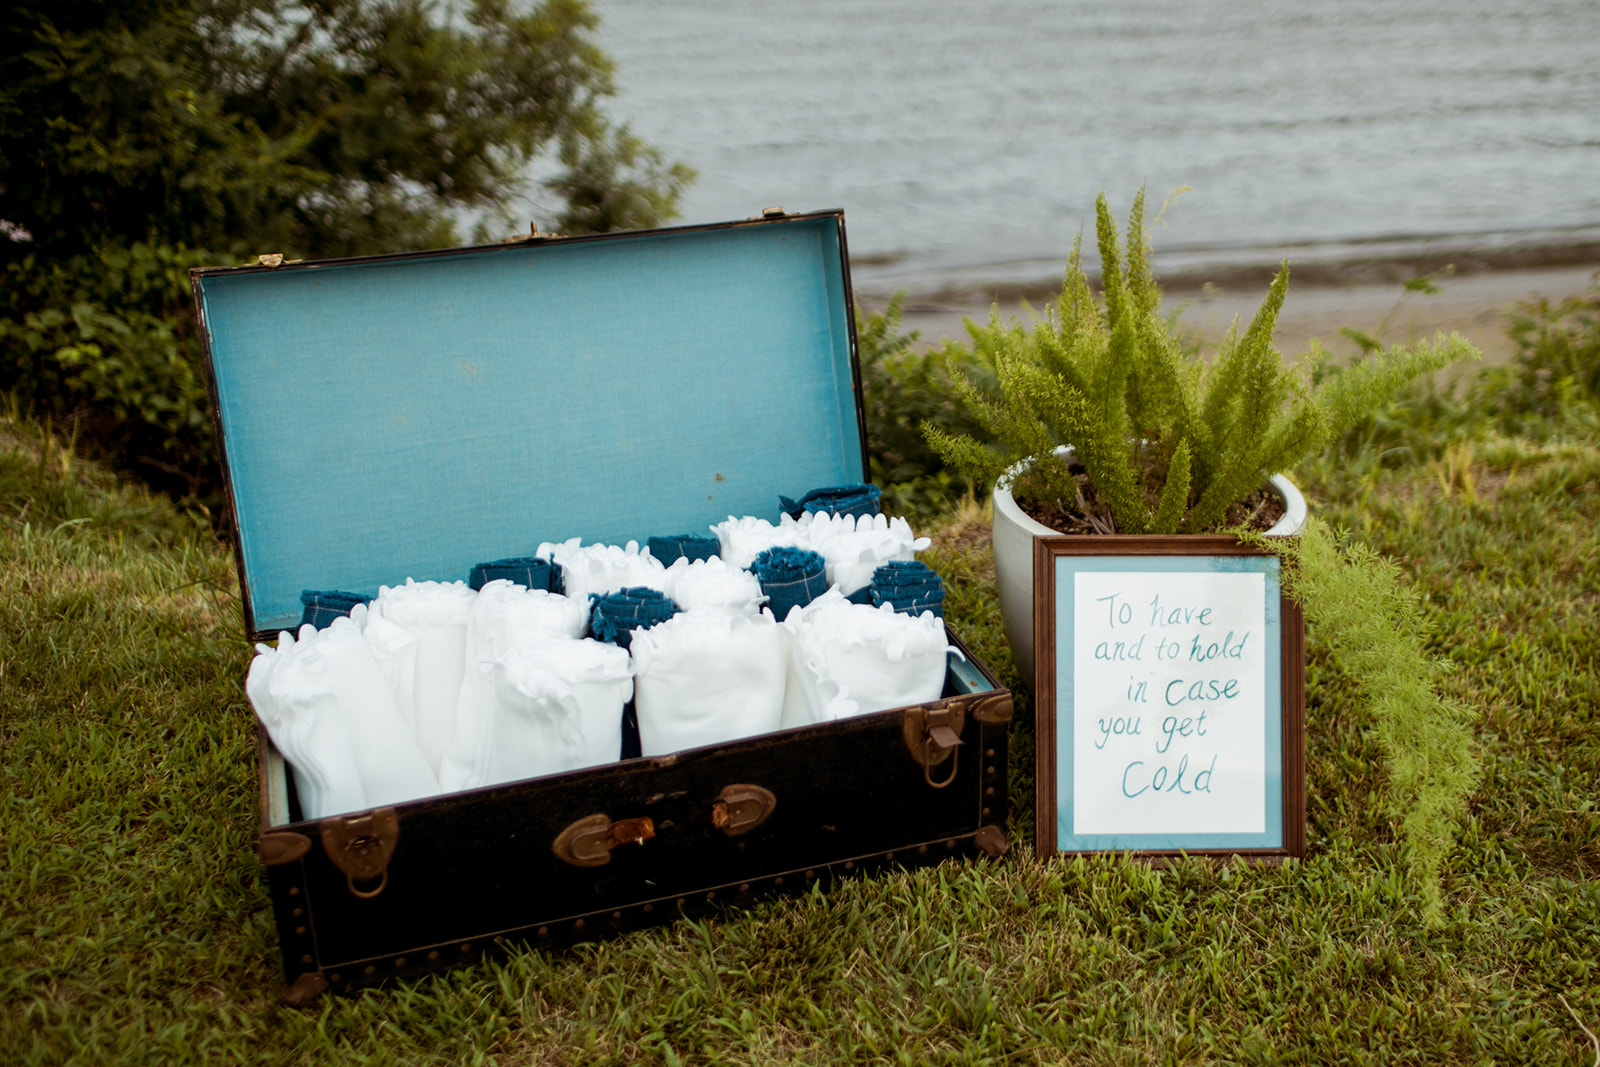 to have and to hold in case you get cold! Fleece blankets as Wedding favors for outdoor weddings - Pearl Weddings & Events